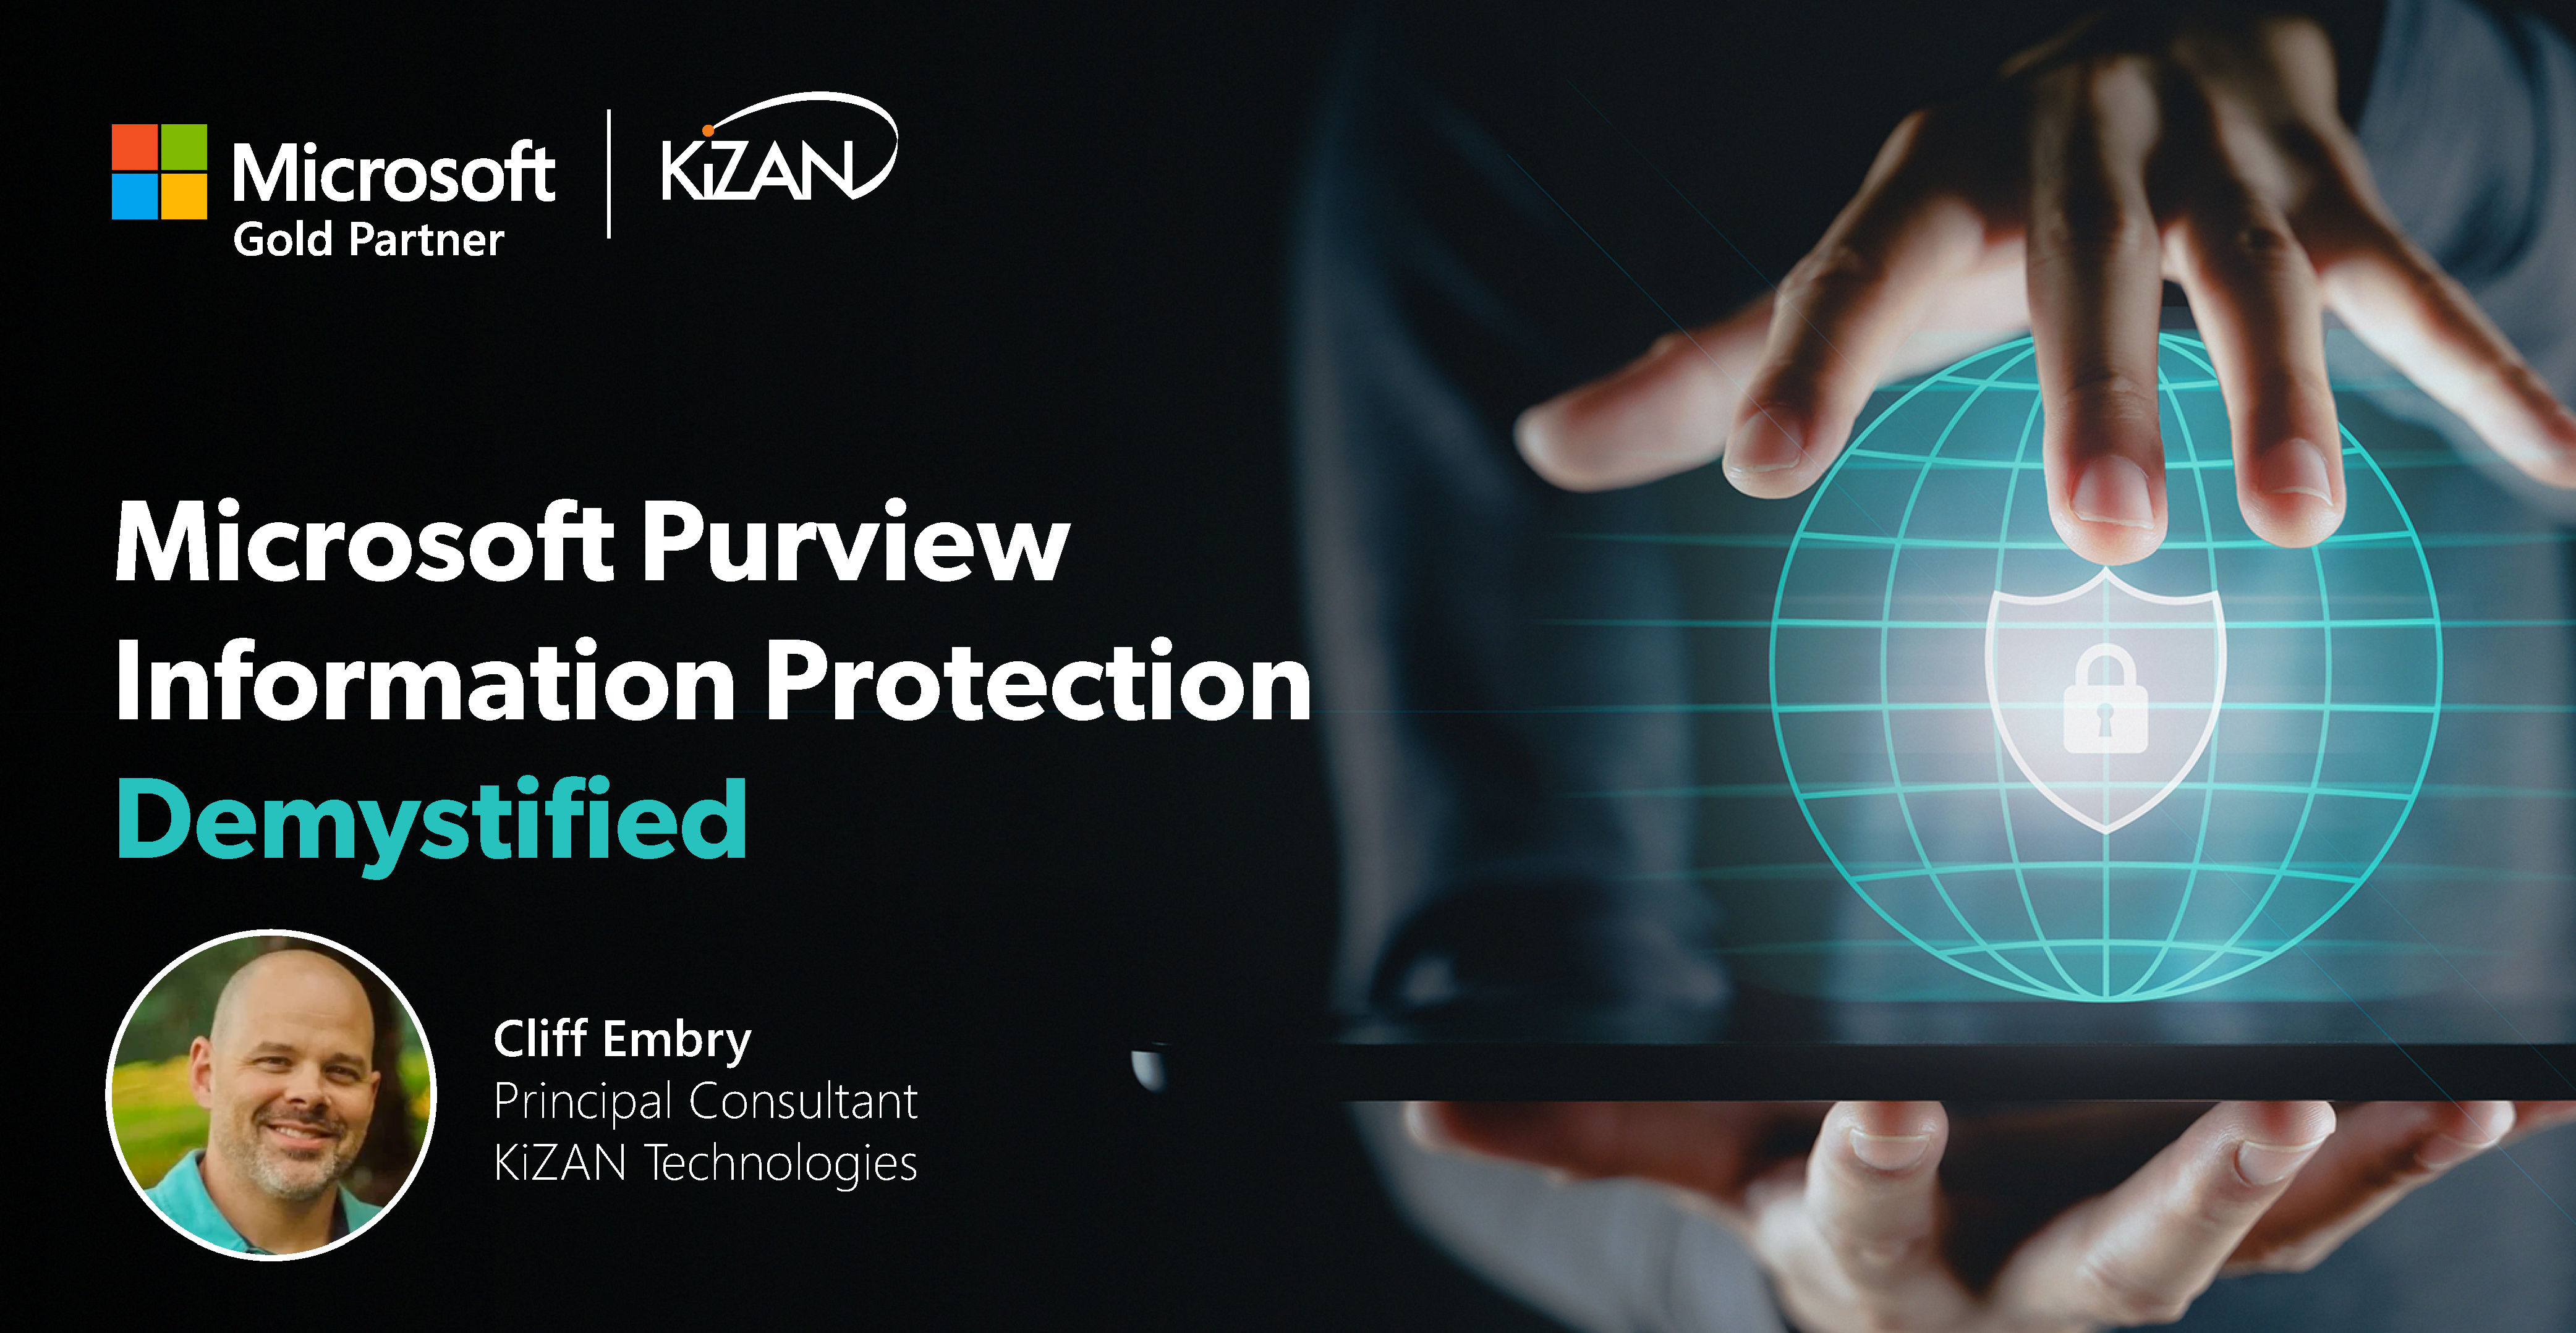 Microsoft Purview Information Protection Demystified